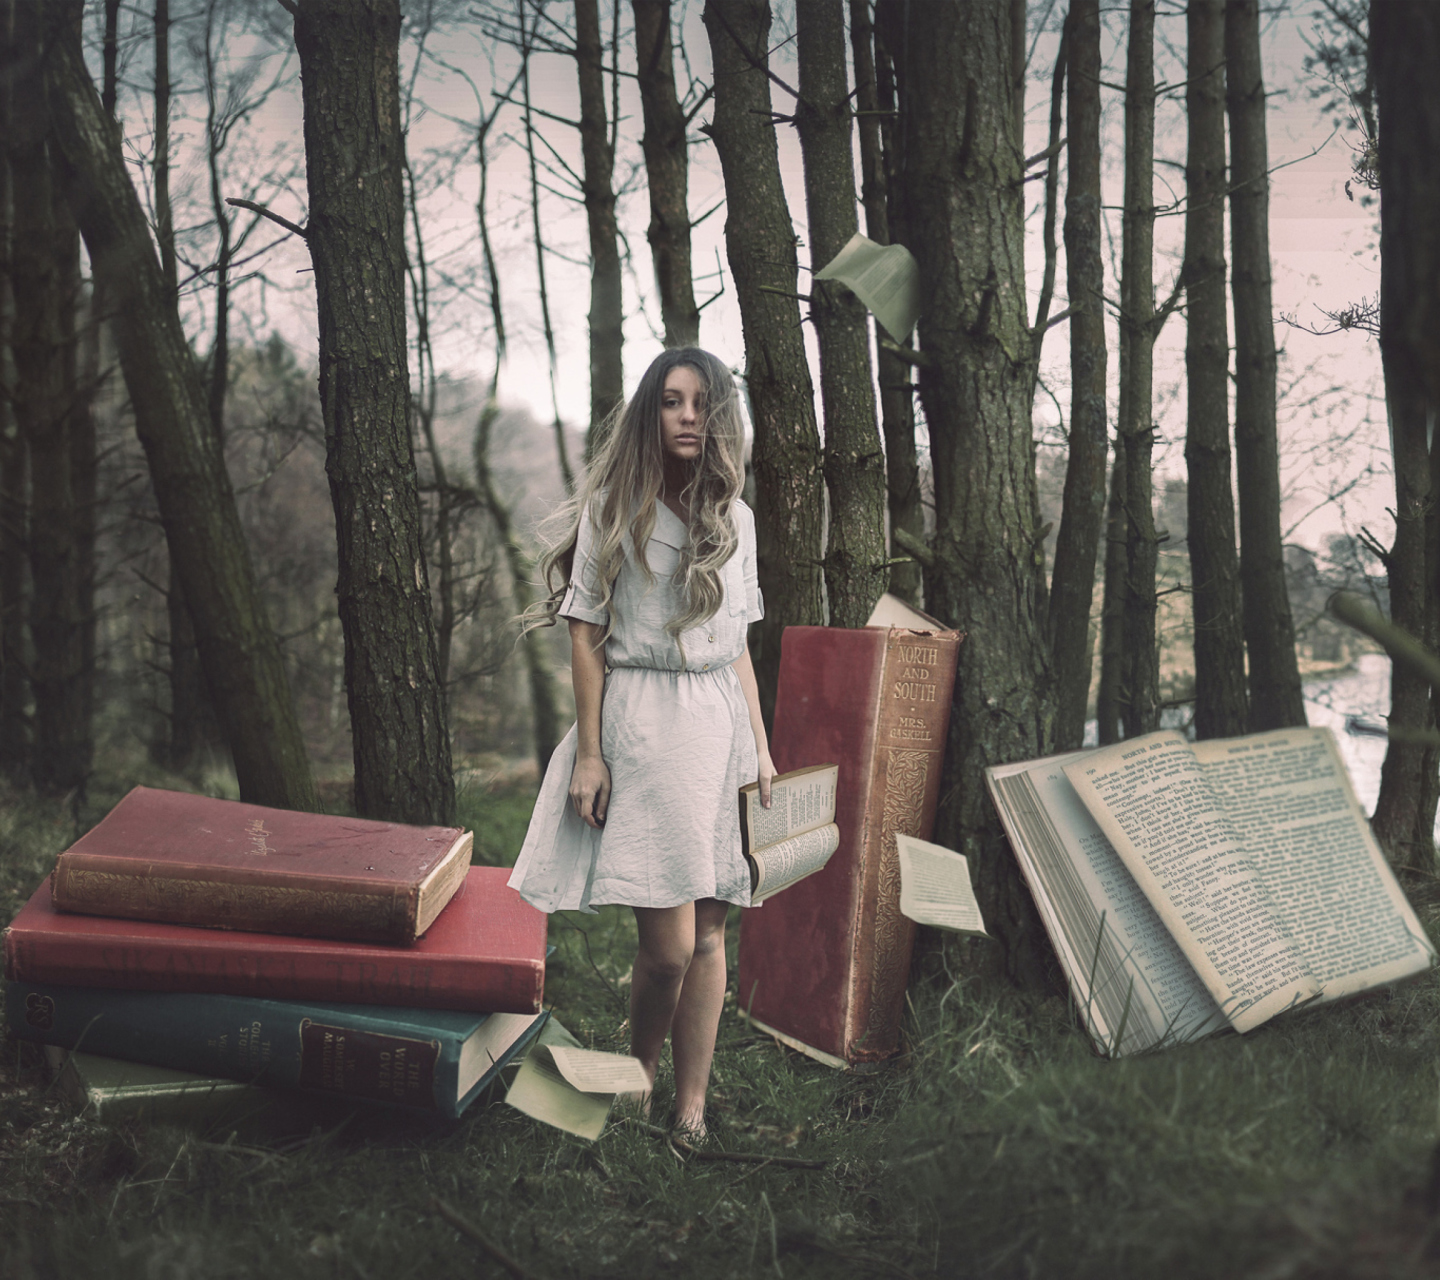 Sfondi Forest Nymph Surrounded By Books 1440x1280